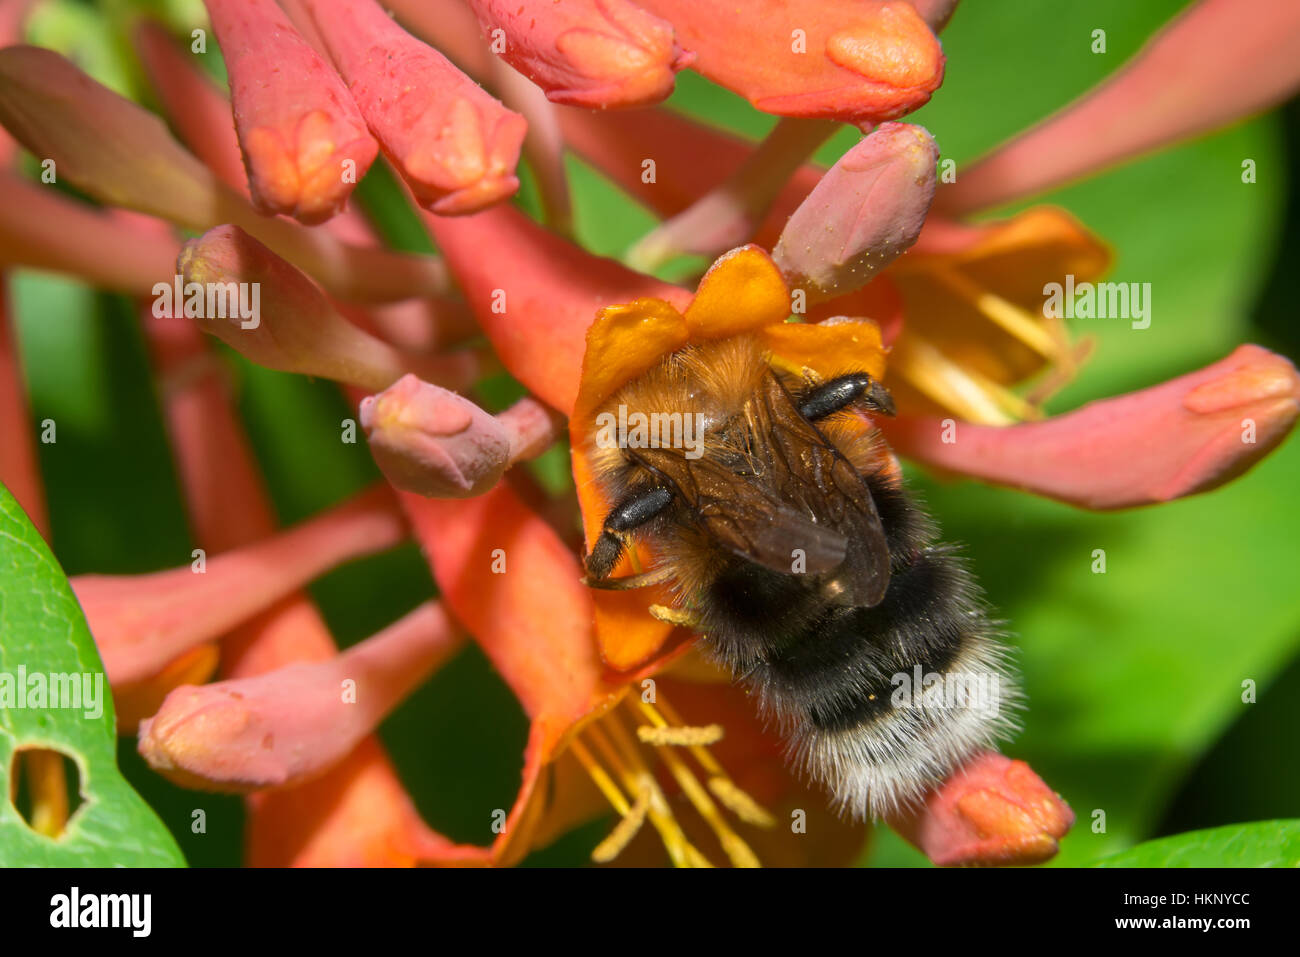 Bumblebee collects nectar from flowers Honeysuckle Brown Stock Photo